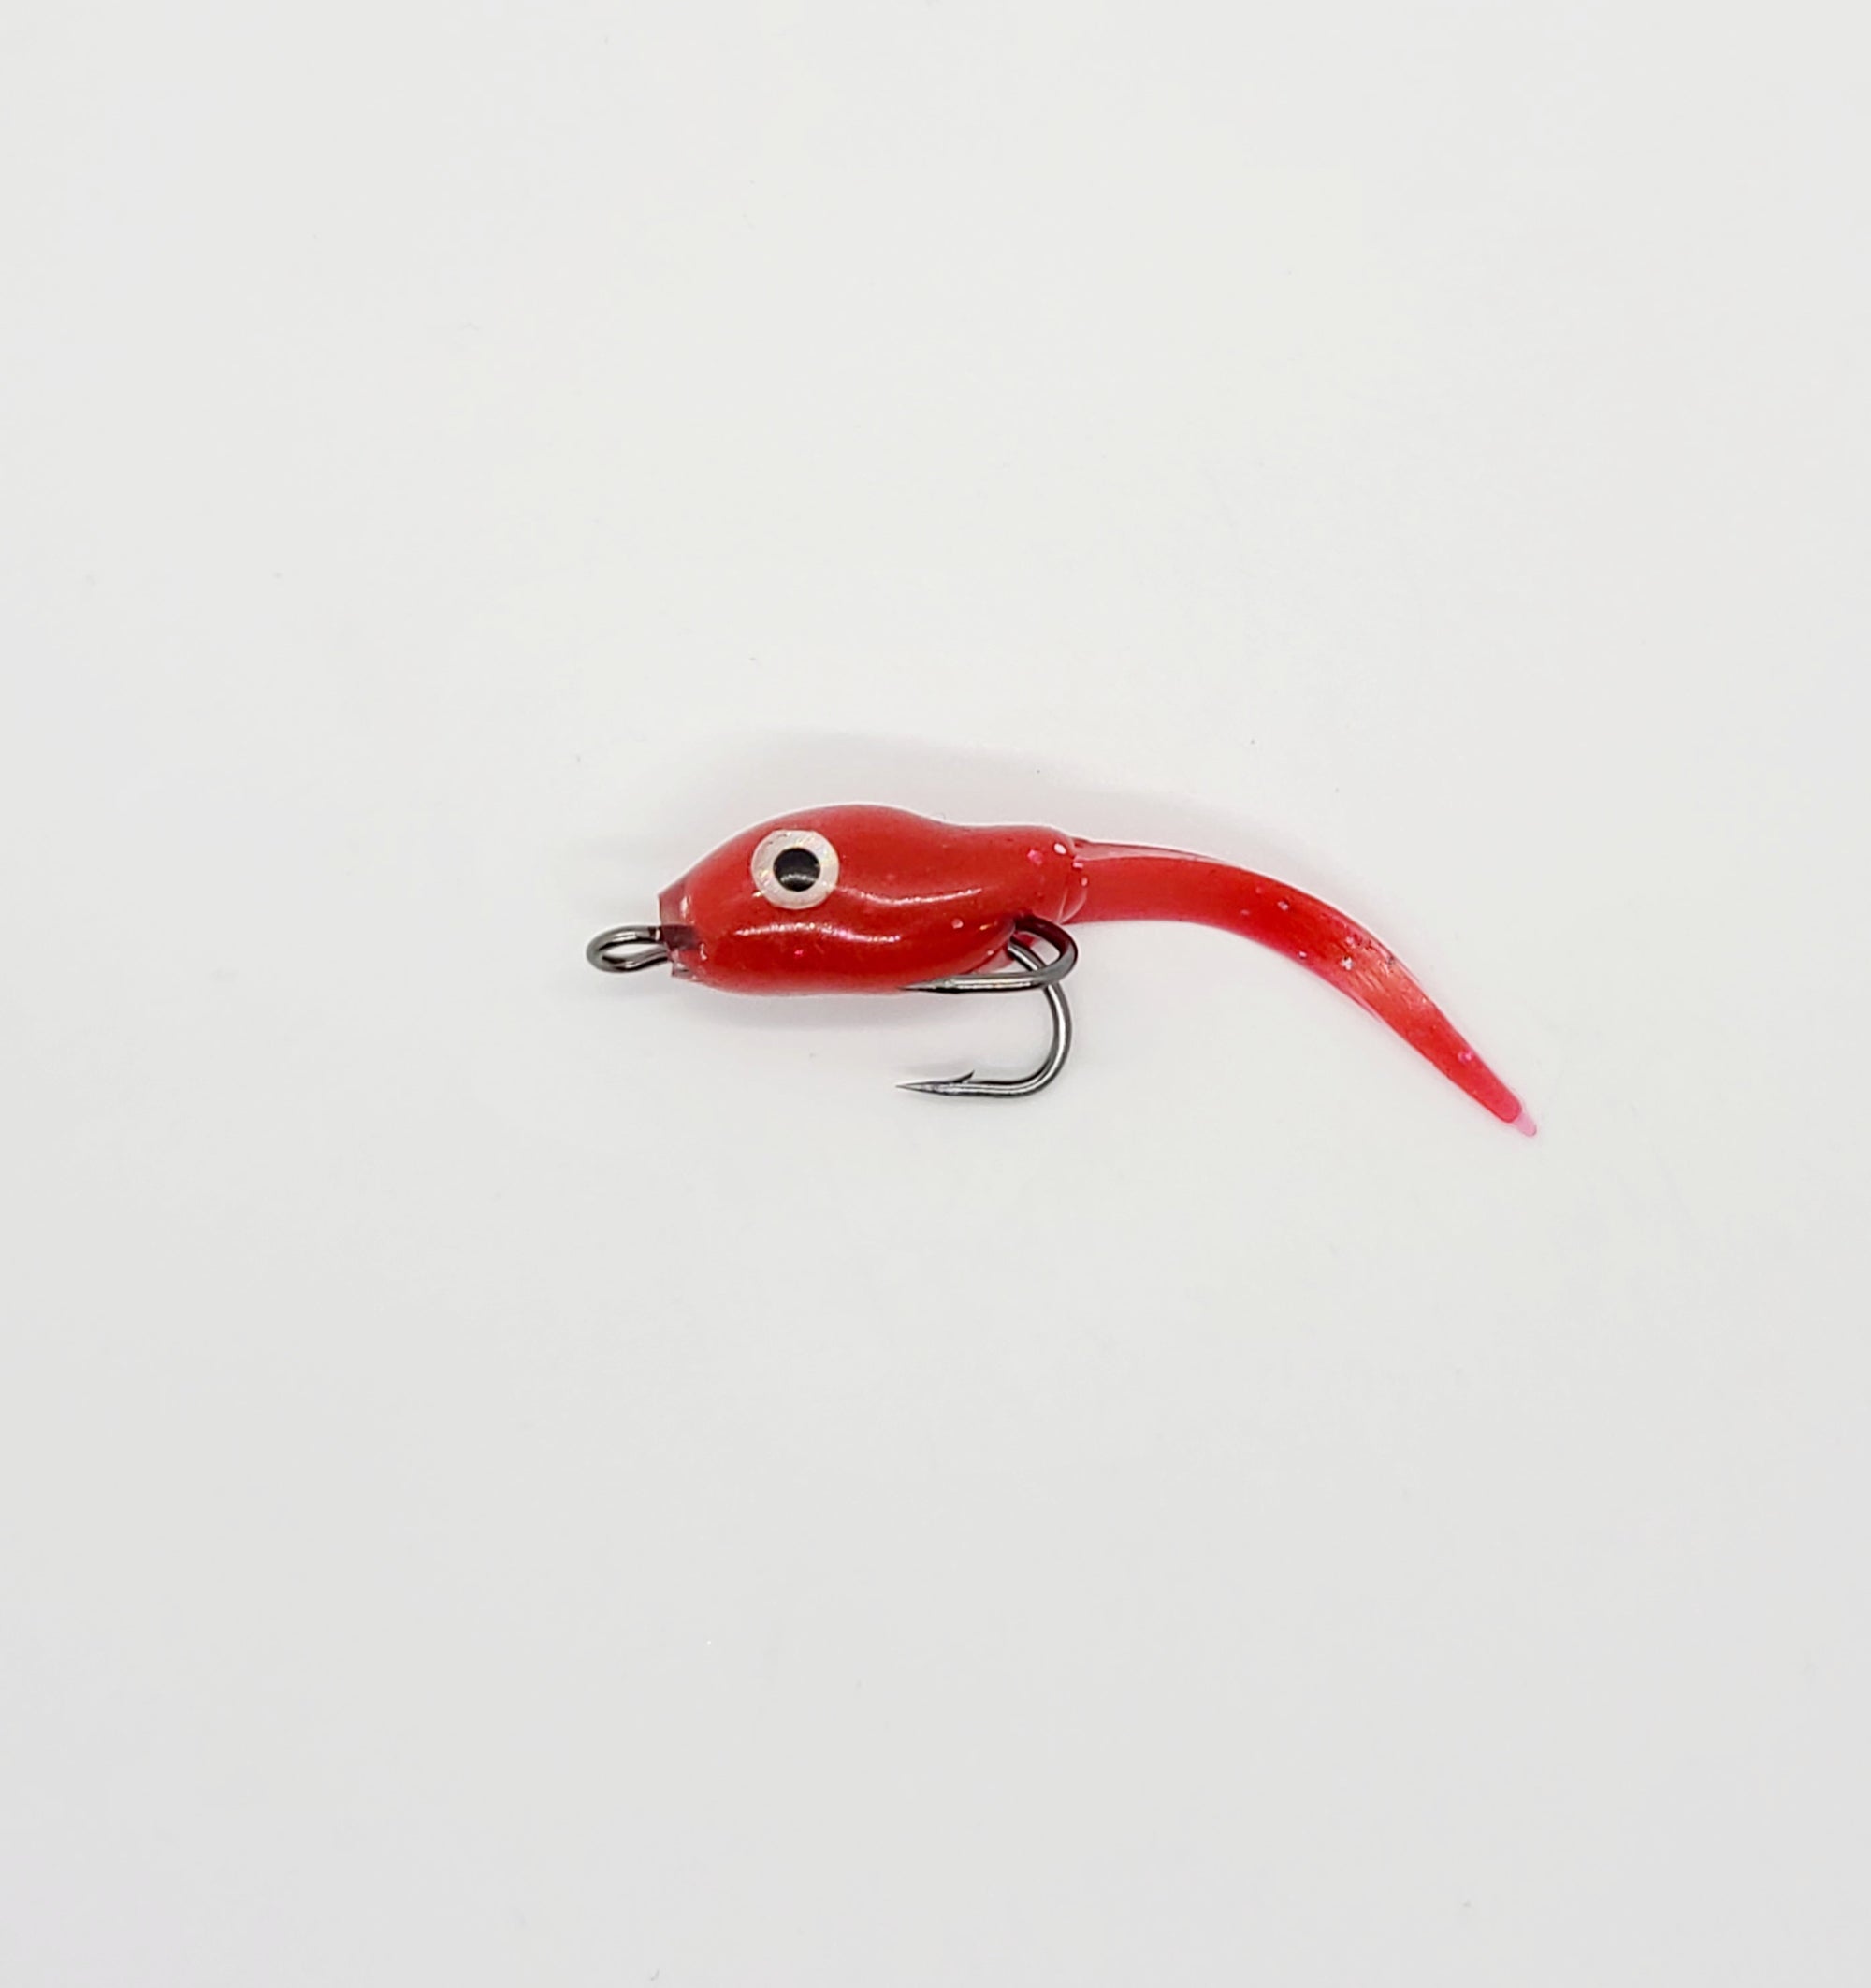 Mighty Minnow Double Hook Jig - Get'n Hook'd Lures